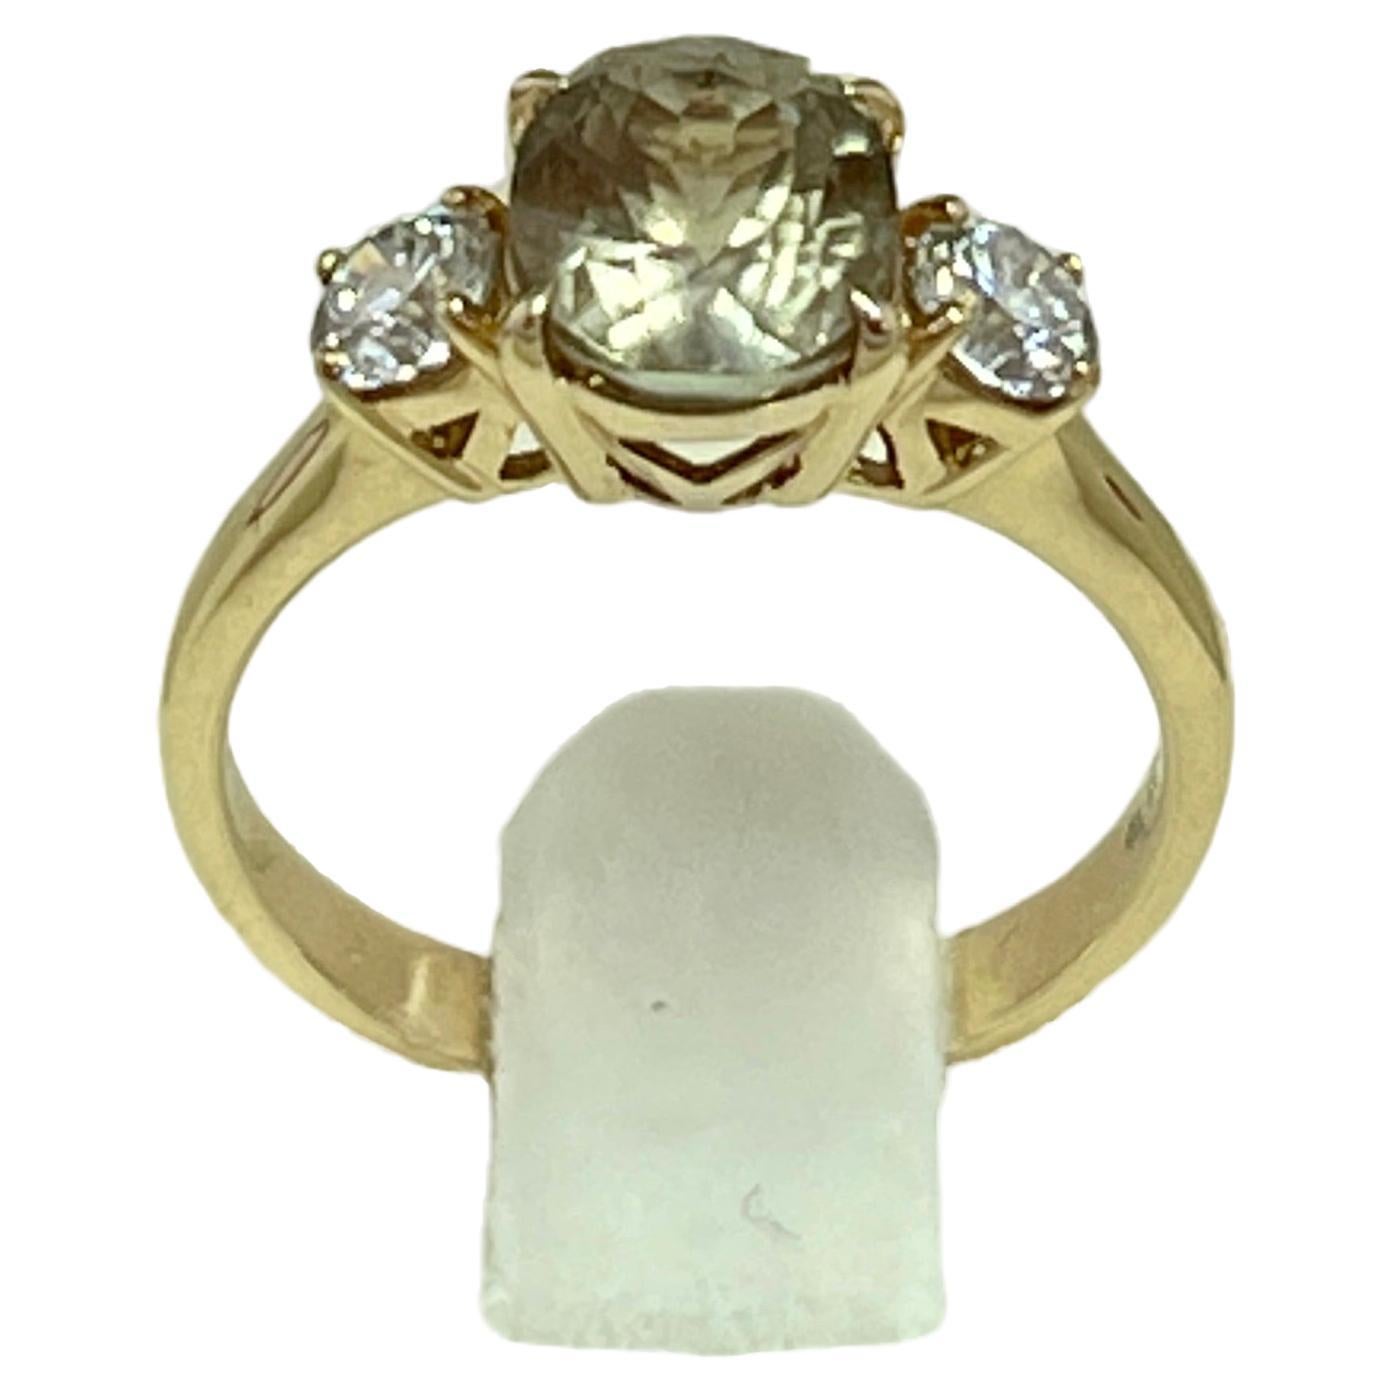 Rare Color Colour Change Natural Untreated Diaspore Diamond Ring with Valuation For Sale